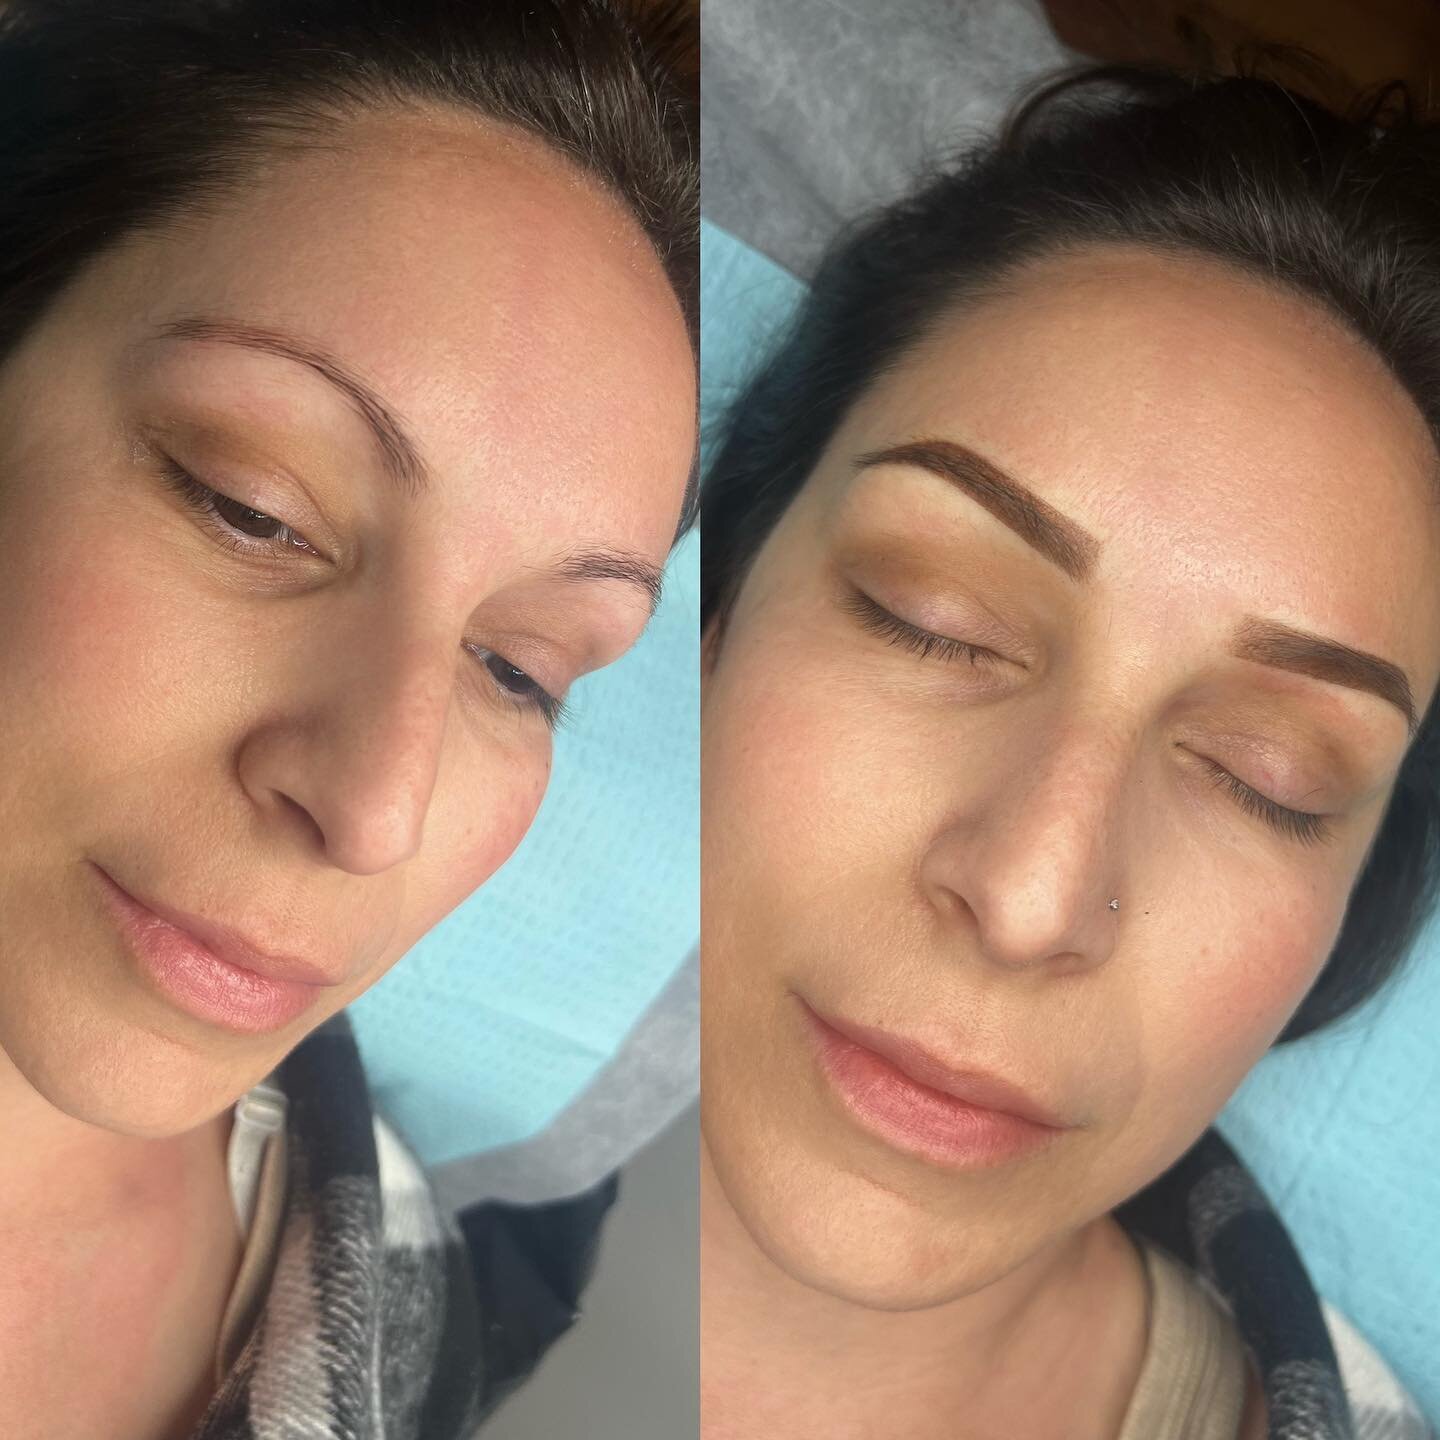 How gorgeous does she look with this brow transformation? 😍 Over tweezed, round or &lsquo;m&rsquo; shaped brows tend to make you look older than you are. I&rsquo;m living for the new shape and and perfect thickness 😍🥰💕 

#vaughanpmu #richmondhill